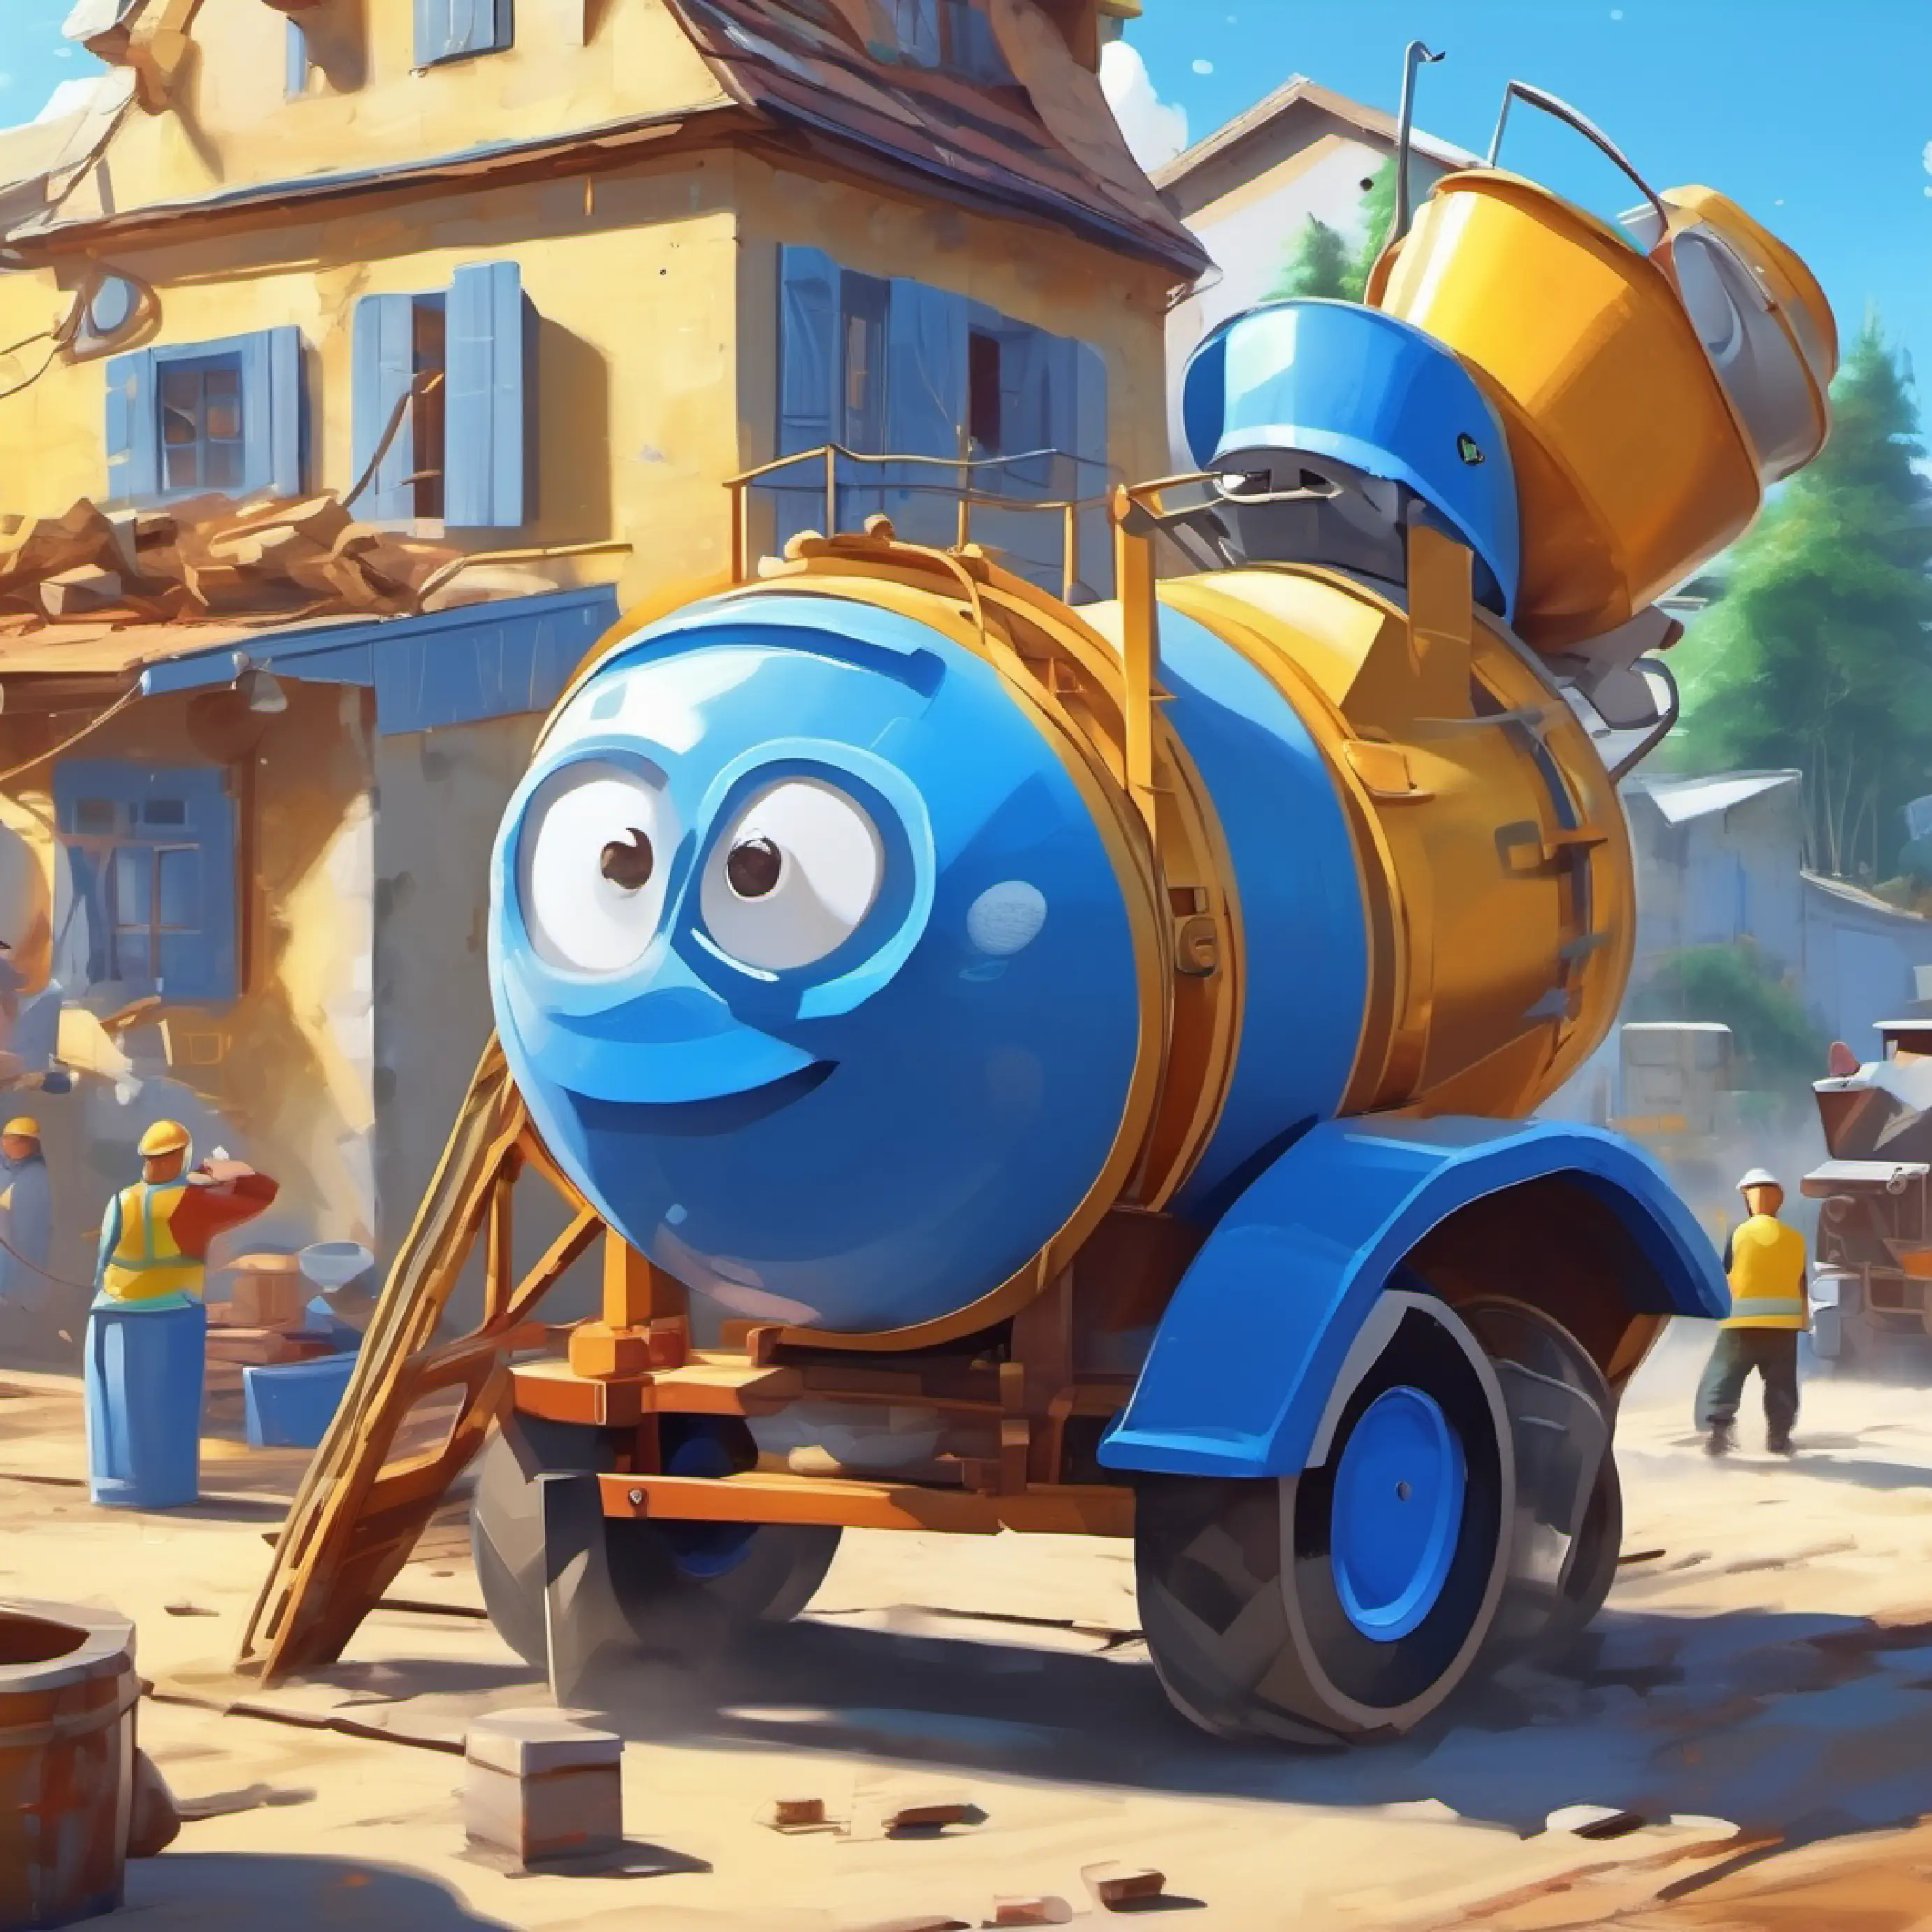 Clever cement mixer, blue, constantly spinning, bright-eyed working, mixing cement, sunny construction environment